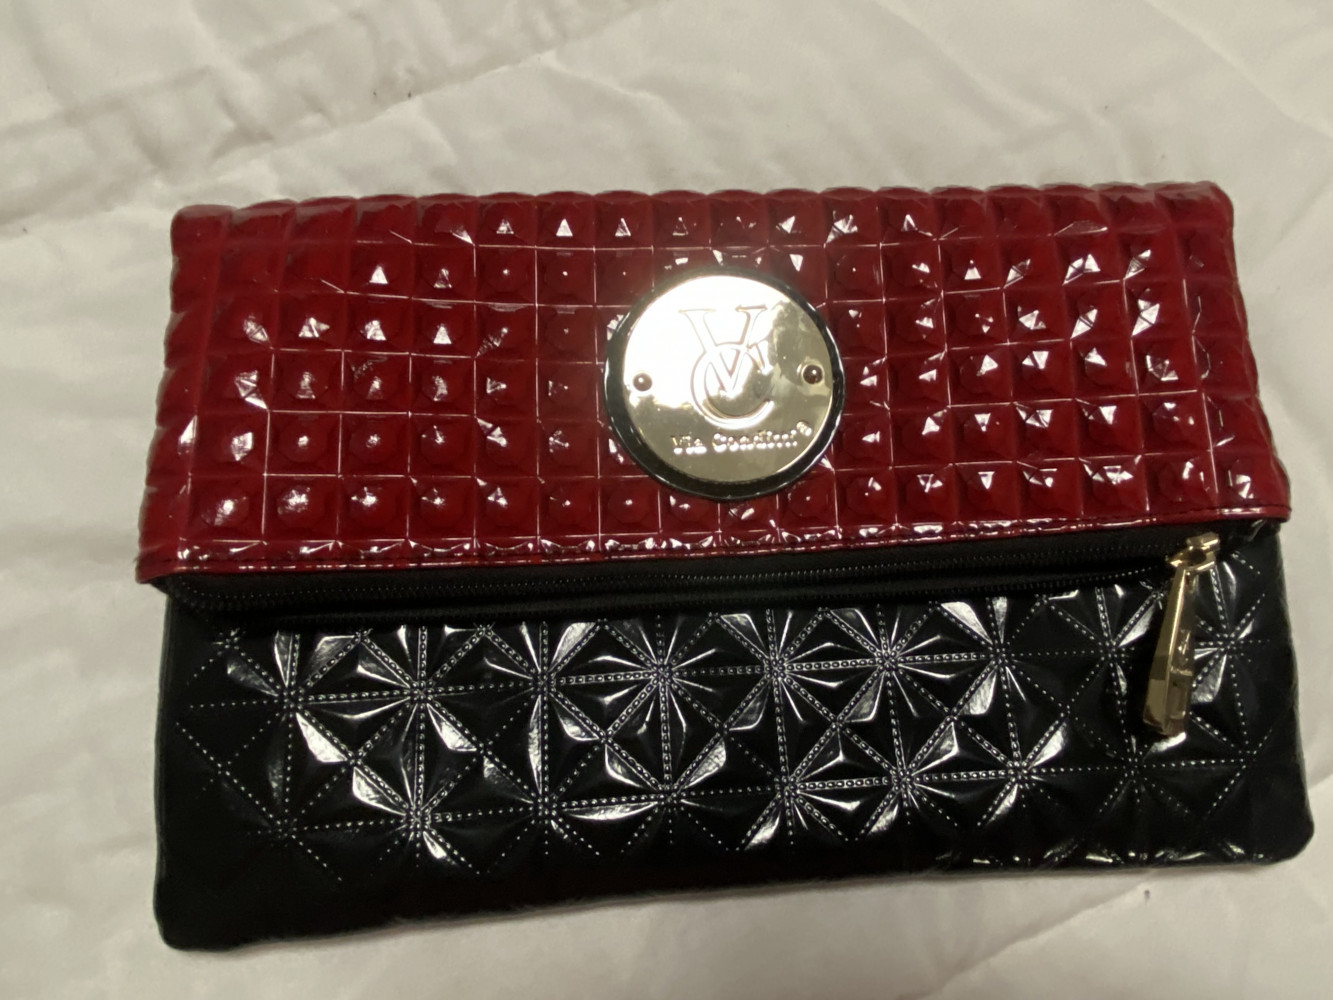 Large red and black clutch